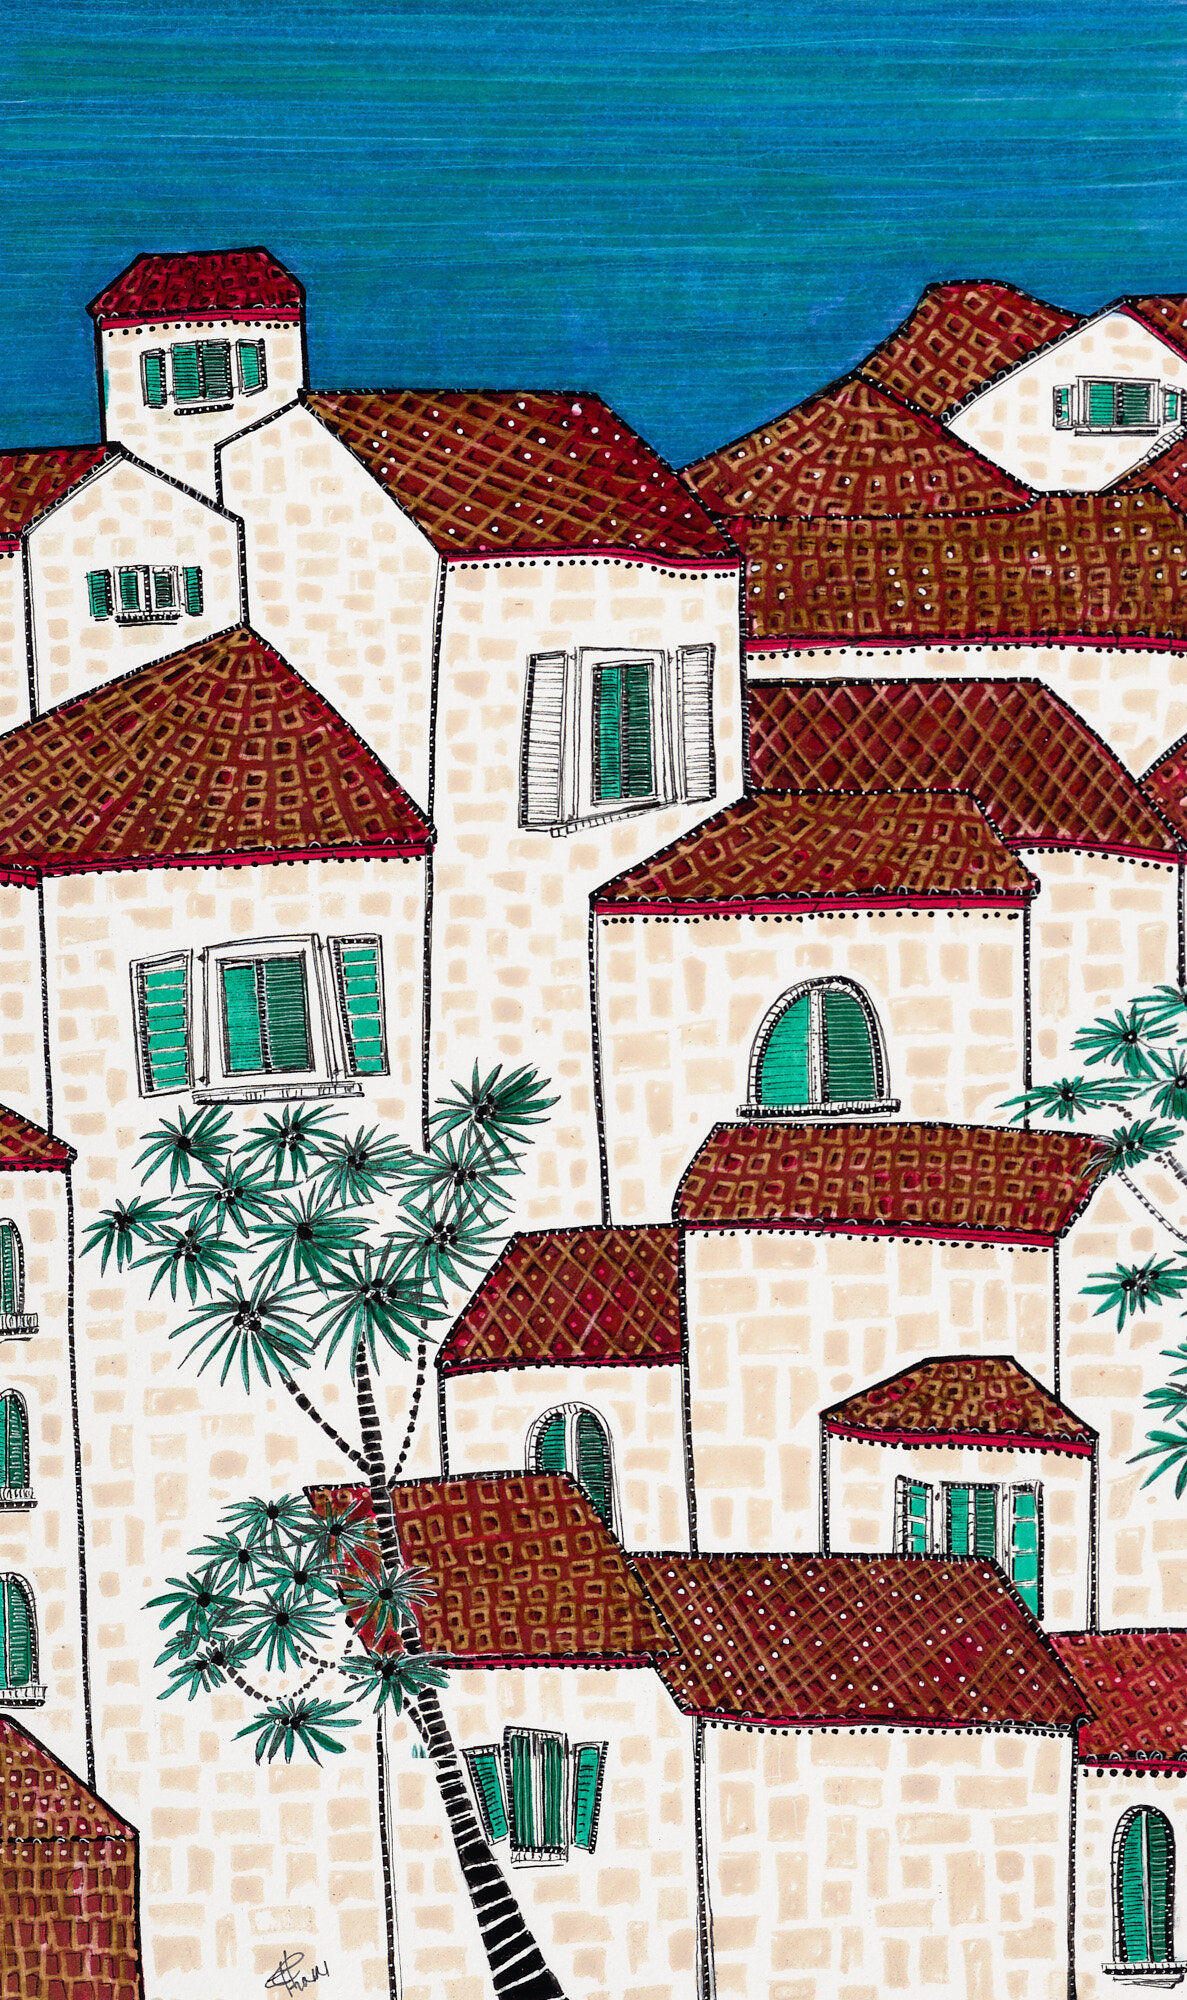  Elle Finn   Mediterranean Rooftops   Pen and ink with embossing, 2021, 18 ½” x 13”    